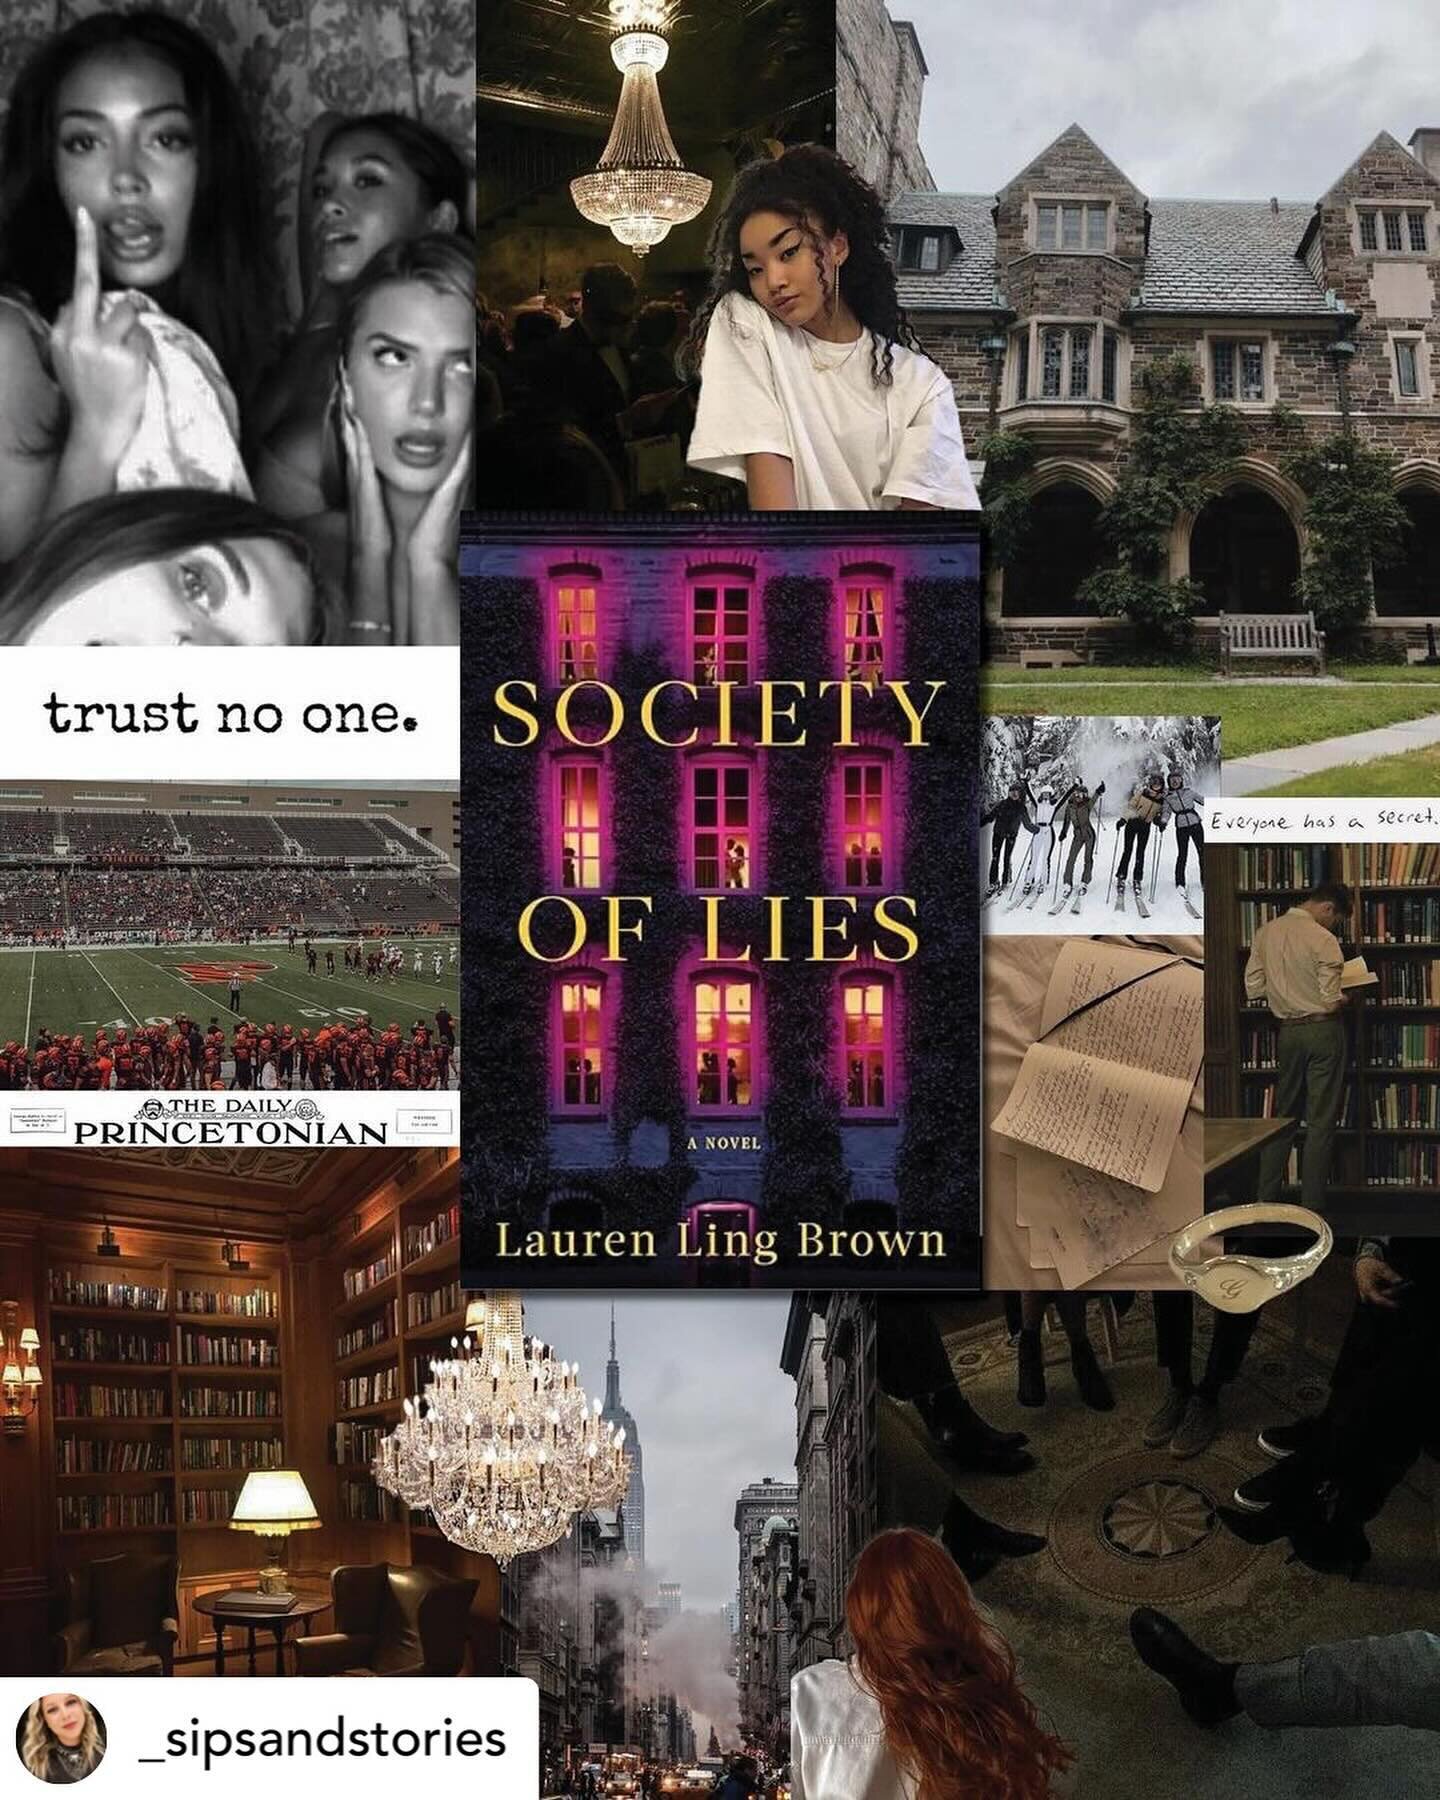 Repost from @_sipsandstories 🥹

Society of Lies by Lauren Ling Brown

My Rating: 4.5 ✨

WOW, what a debut!! This will be a thriller of the summer and it is well deserved! I literally read the Prologue and was so intrigued that I stopped reading anot